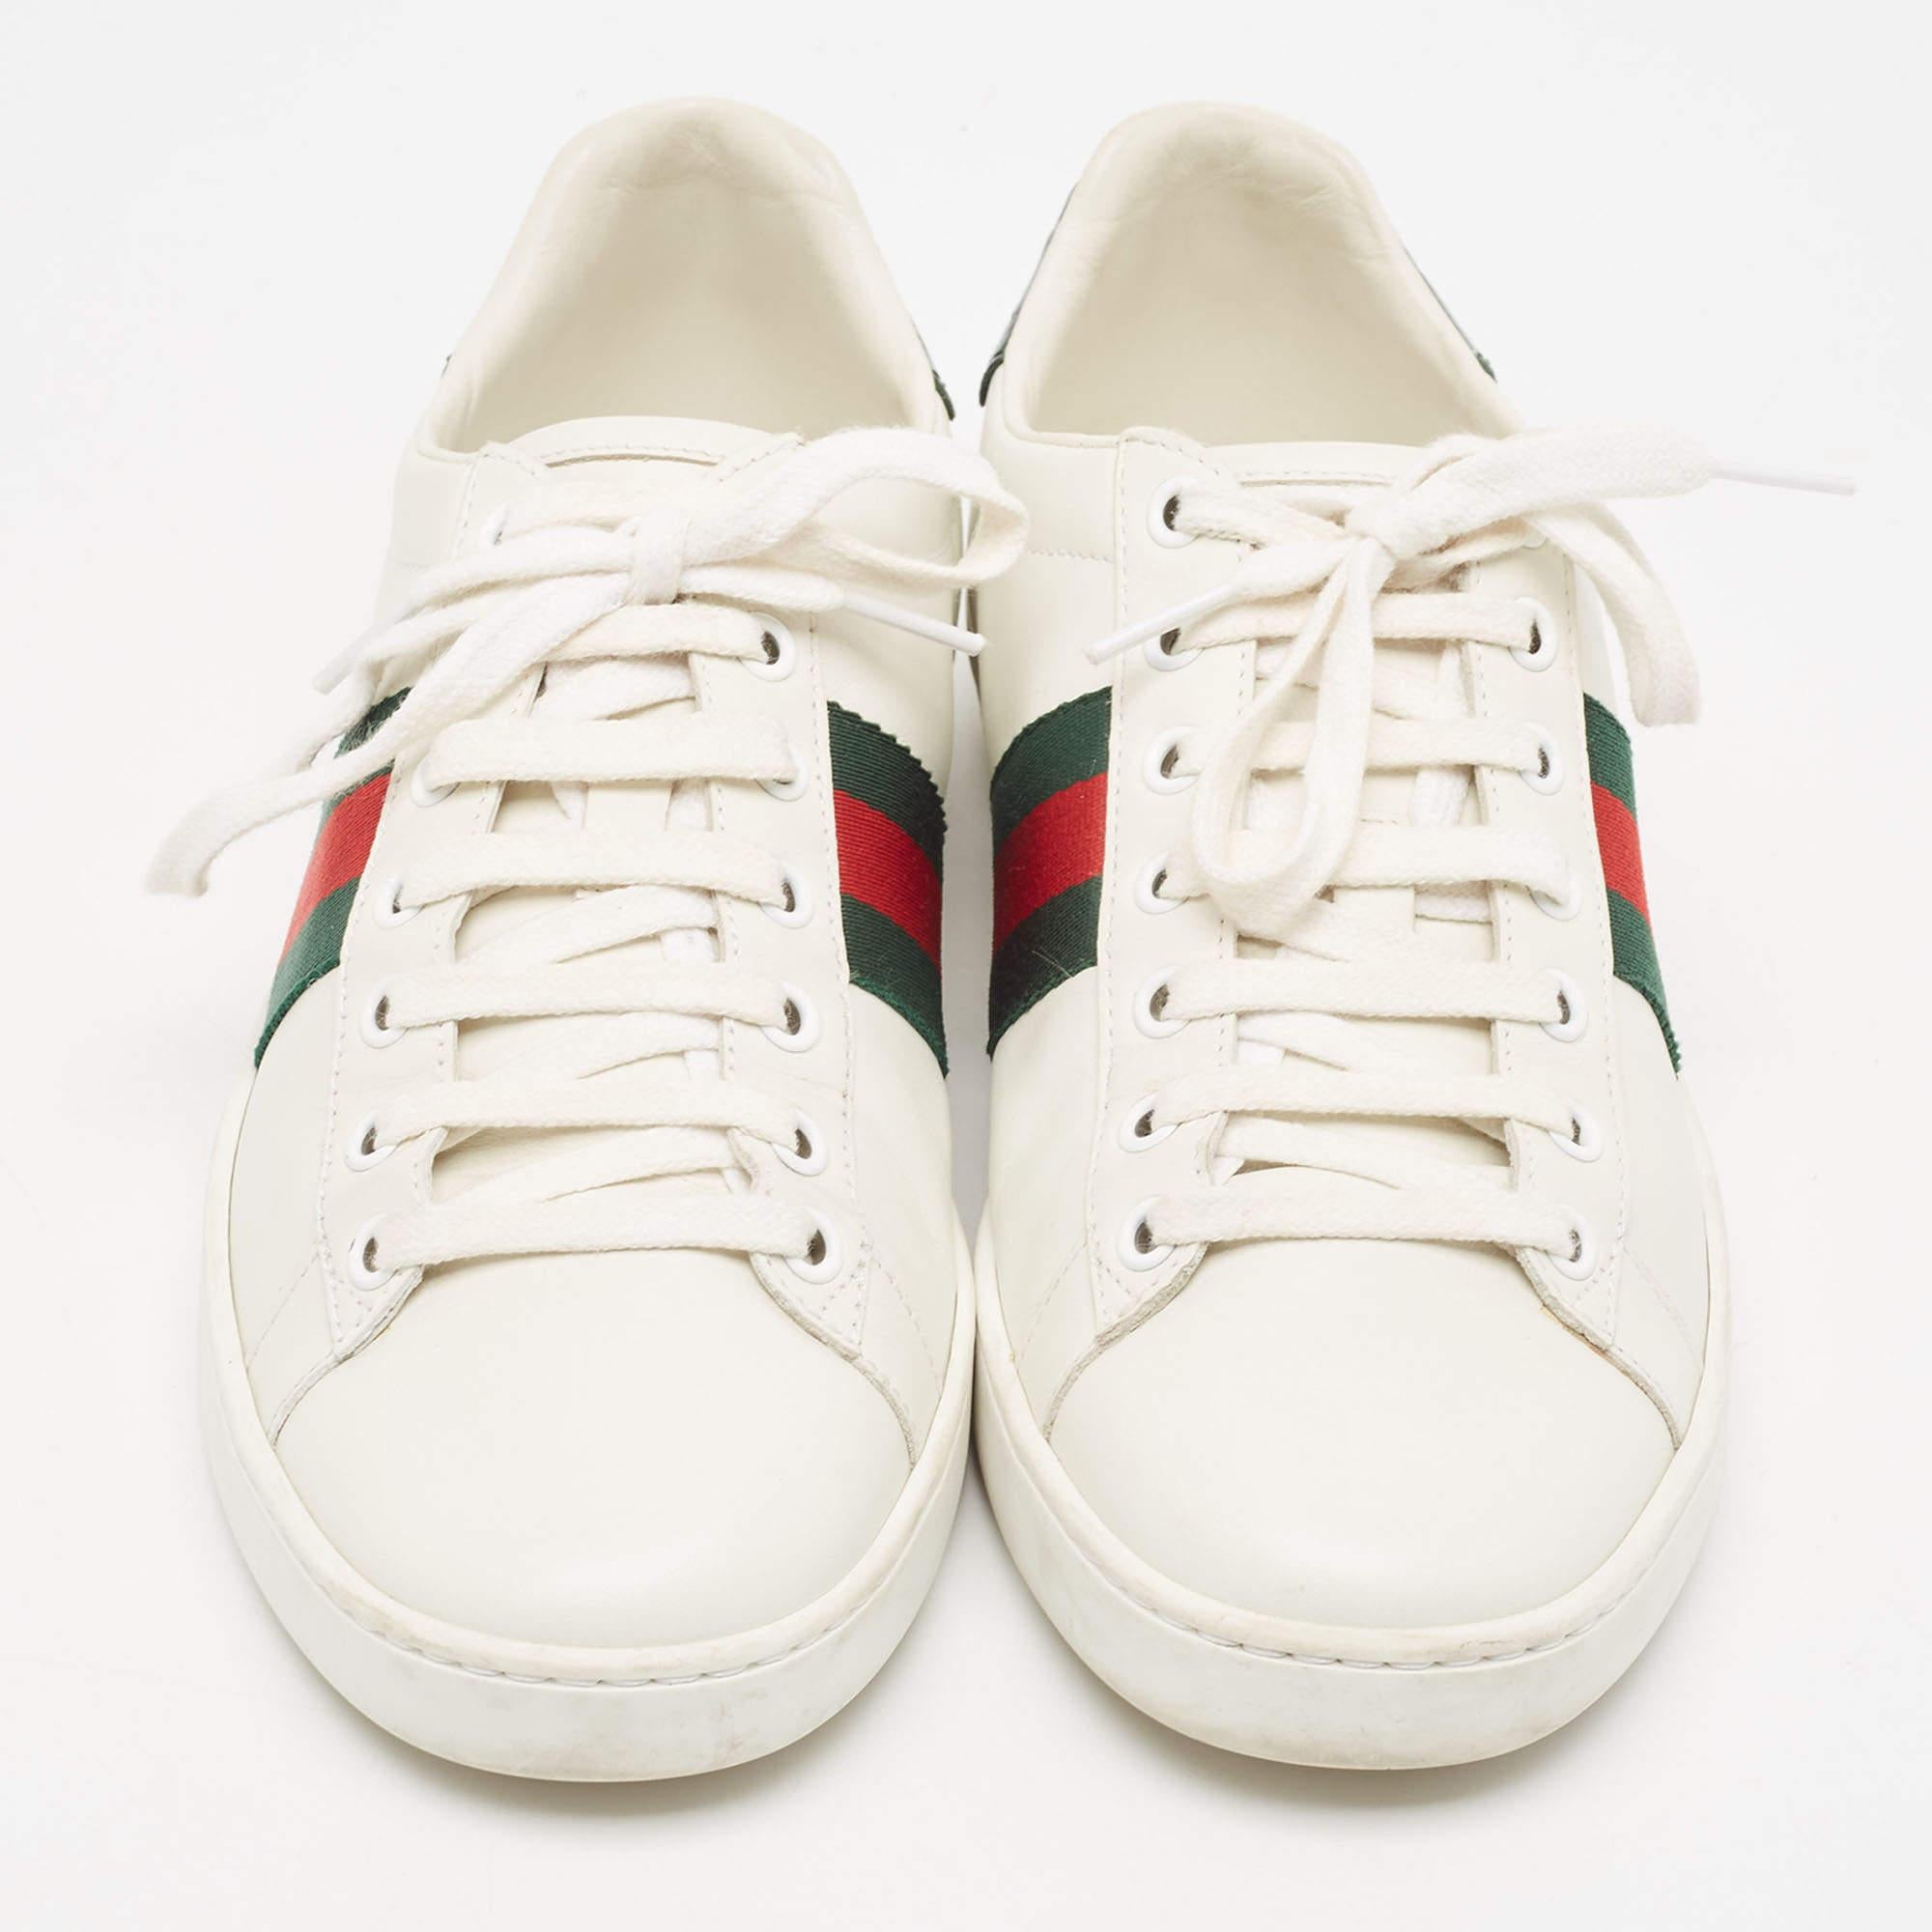 Gucci White/Green Cro Embossed and Leather Ace Sneakers Size 38 For Sale 1